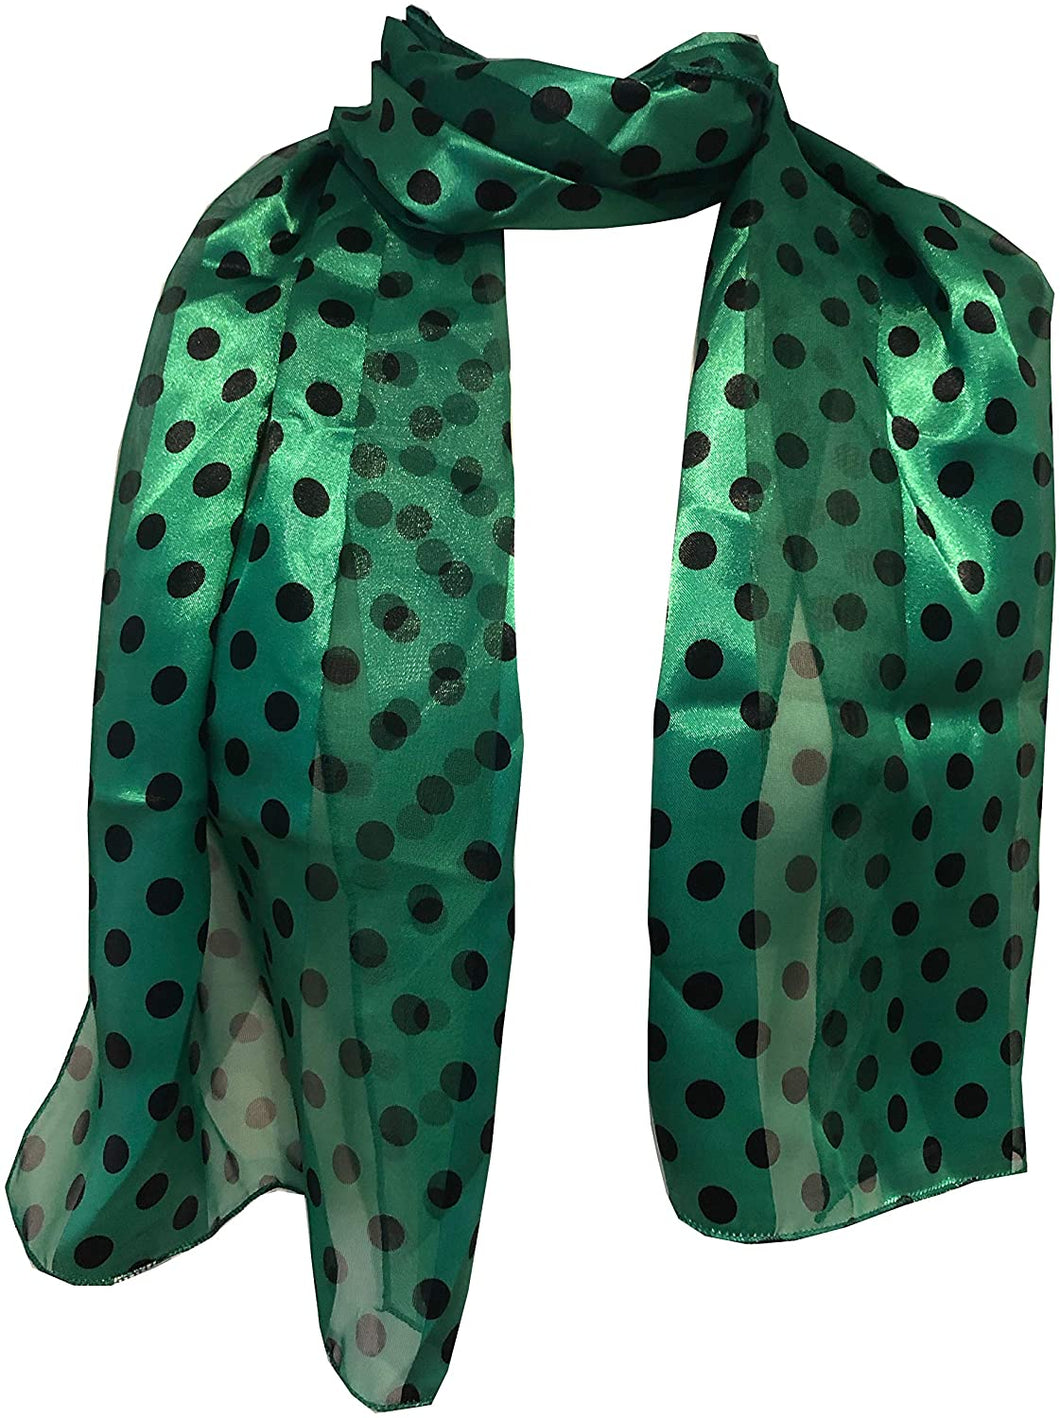 Pamper Yourself Now Green with Black Medium spot Thin Pretty Scarf. Lovely with Any Outfit